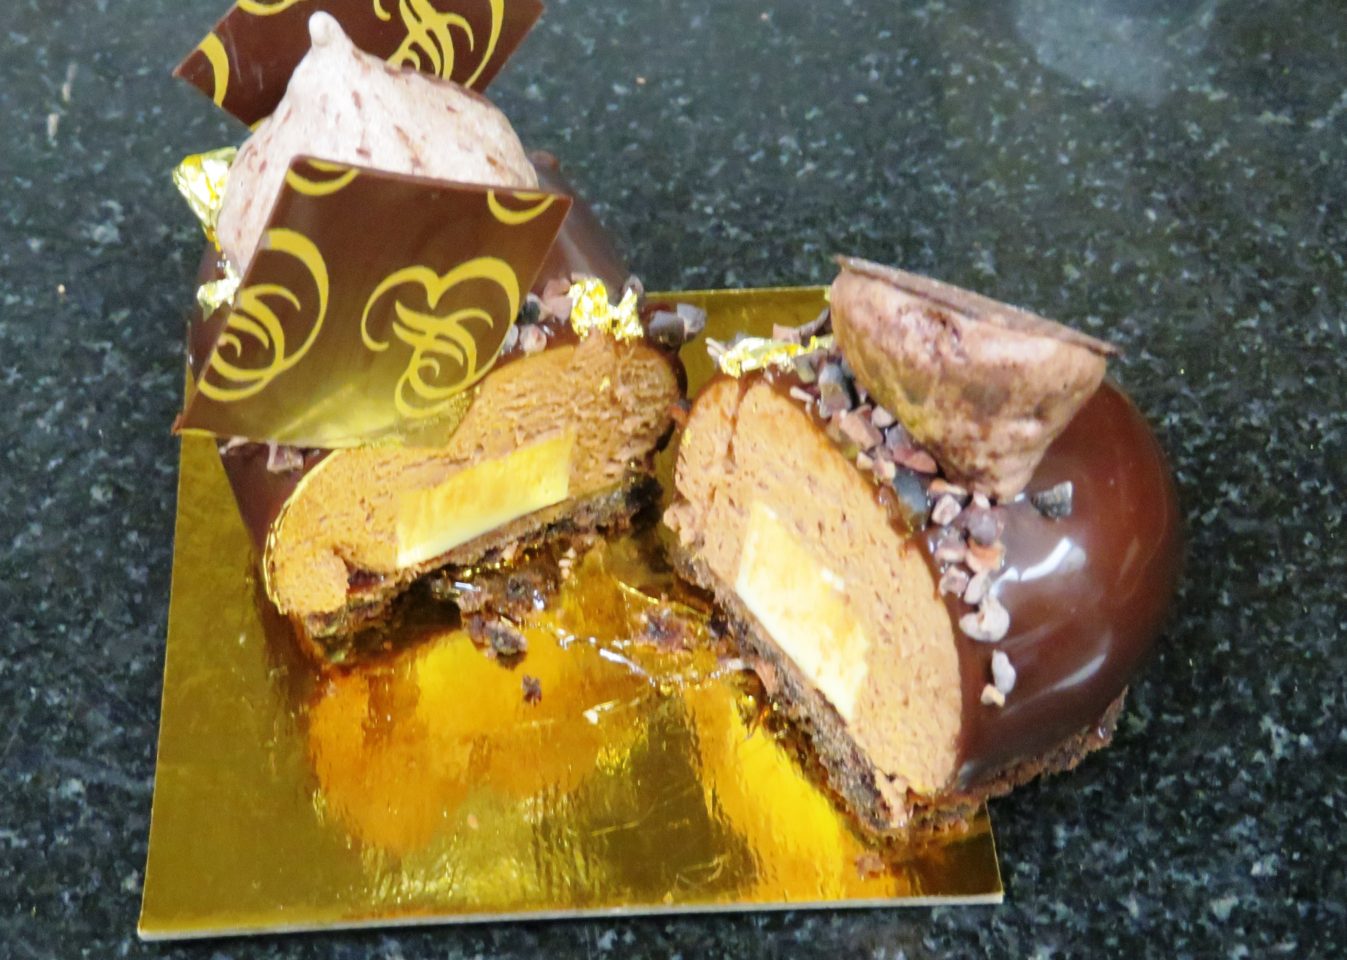 Culinary Excellence at <em><strong>The Broadmoor</strong> </em>~ a truly divine Chef Adam <em>patisserie</em> creation full of flavors that surprise and delight throughout the entire chocolate experience